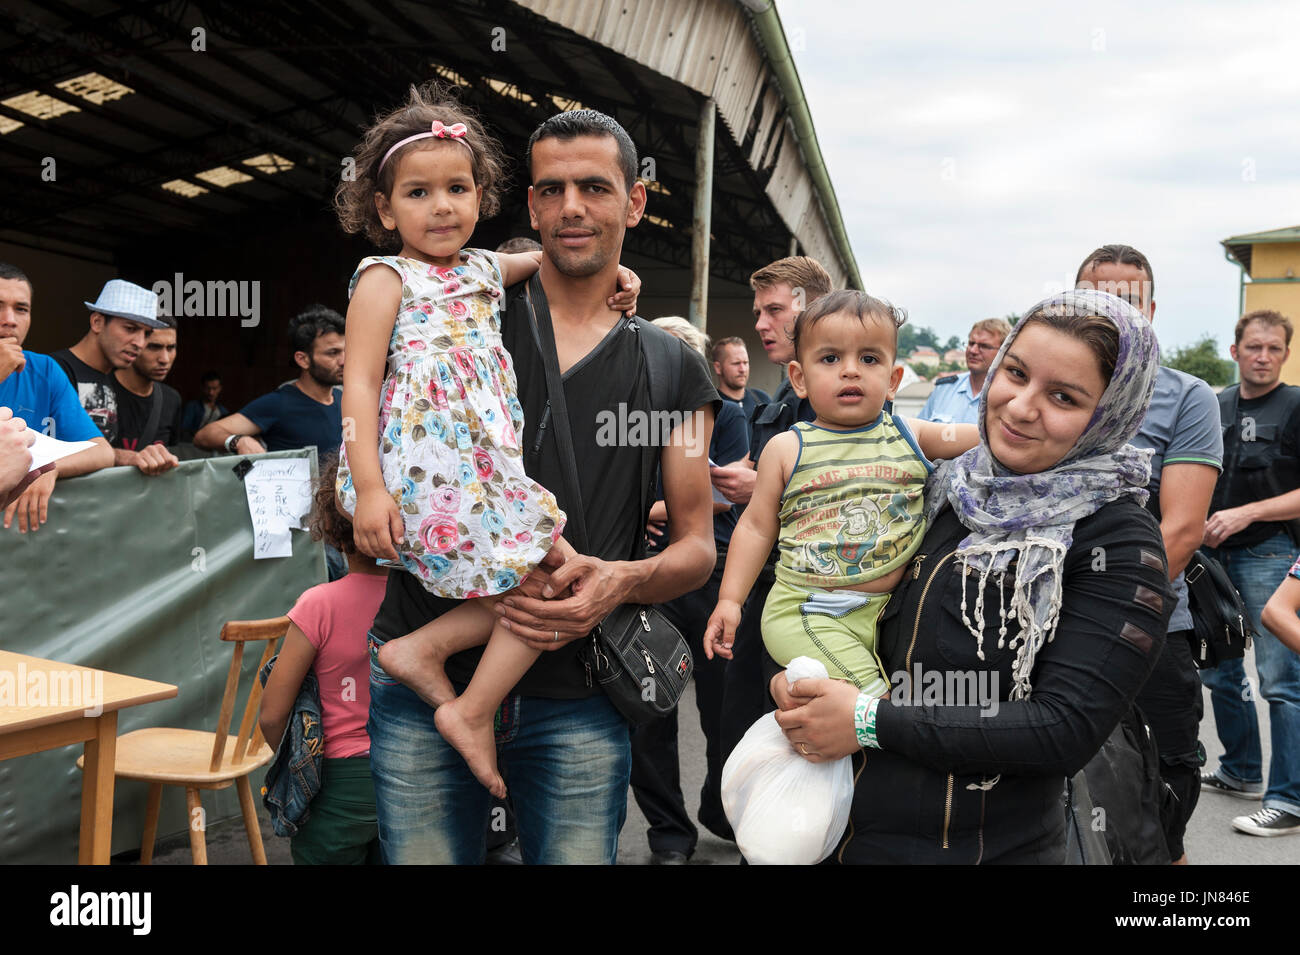 Passau, Germany - August 1st, 2015: Syrian refugee family at a registration camp in Passau, Germany. They are seeking asylum in Europe. Stock Photo